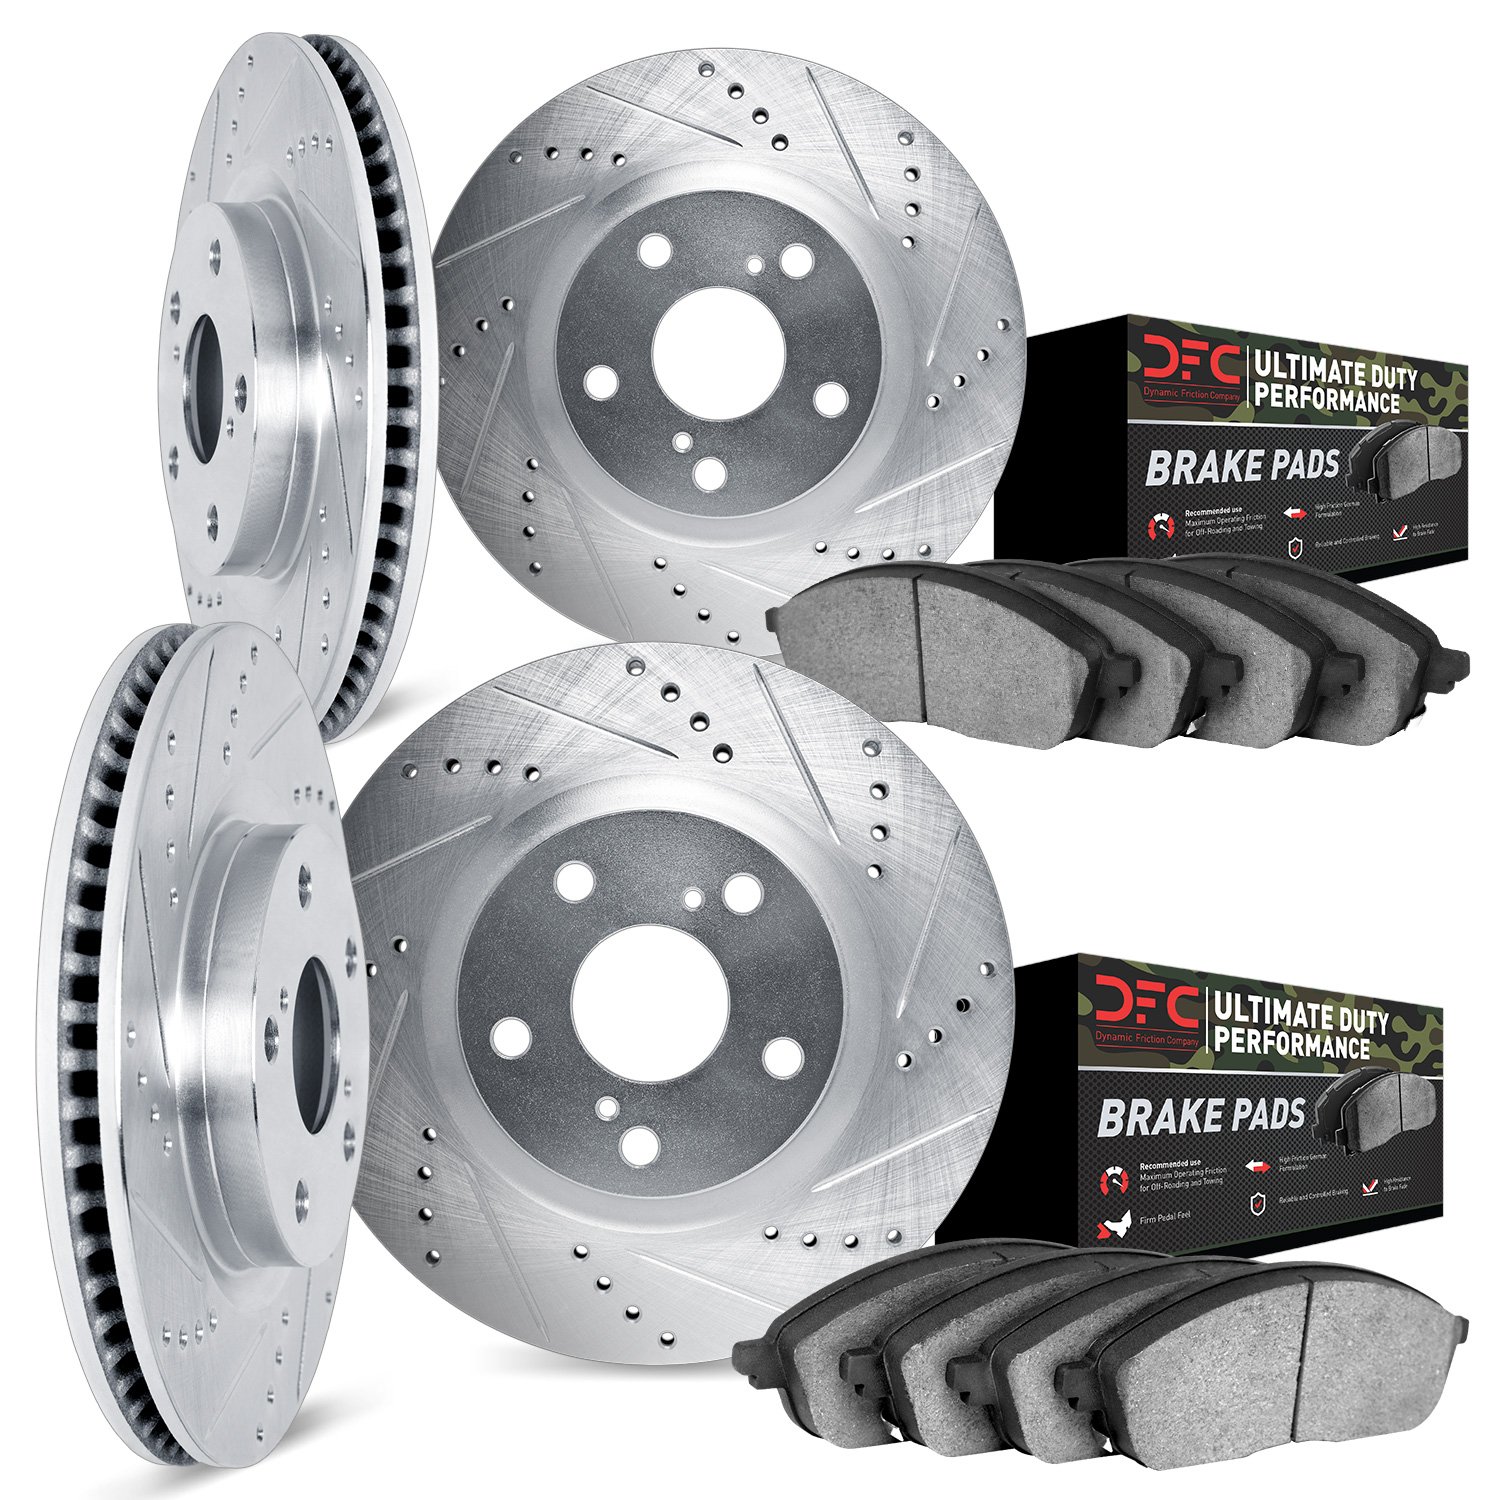 7404-48002 Drilled/Slotted Brake Rotors with Ultimate-Duty Brake Pads Kit [Silver], 1998-2005 GM, Position: Front and Rear